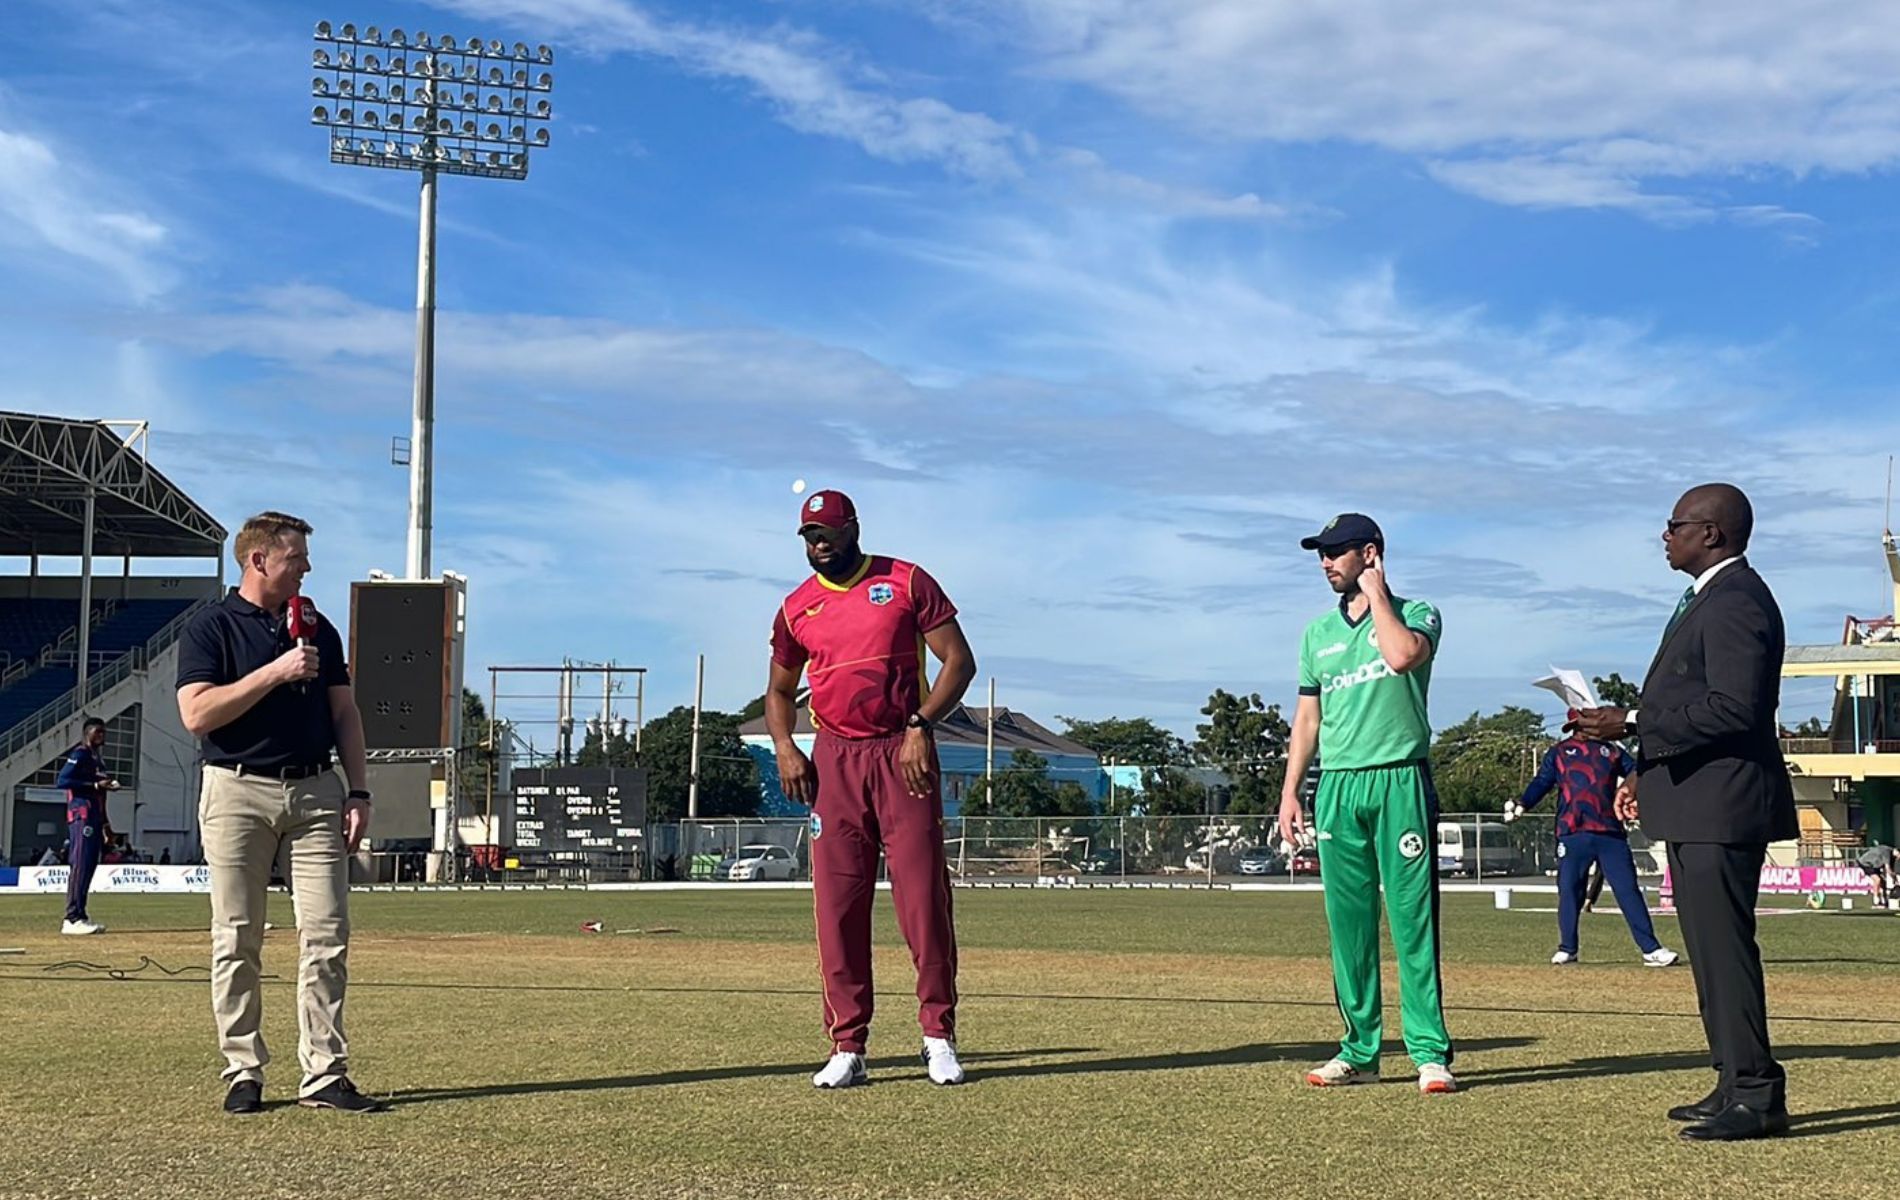 The 2nd ODI between West Indies and Ireland was to be played on Tuesday